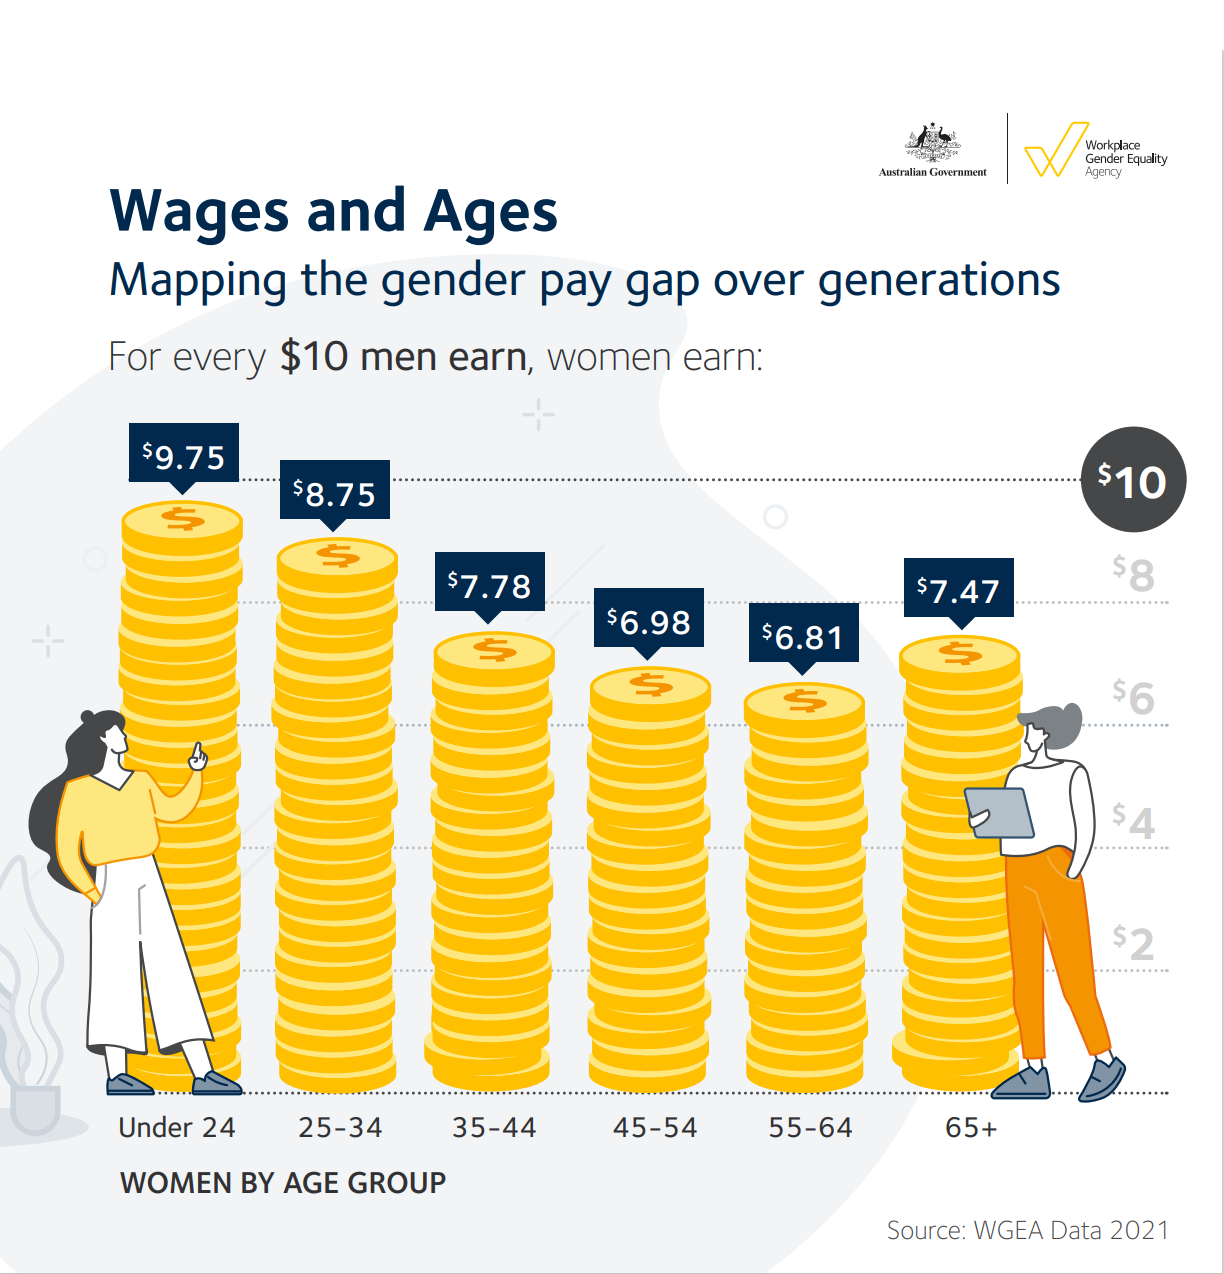 A graphic using gold coins as graphs showing how much money women earn to men's $10 by different age groups. 